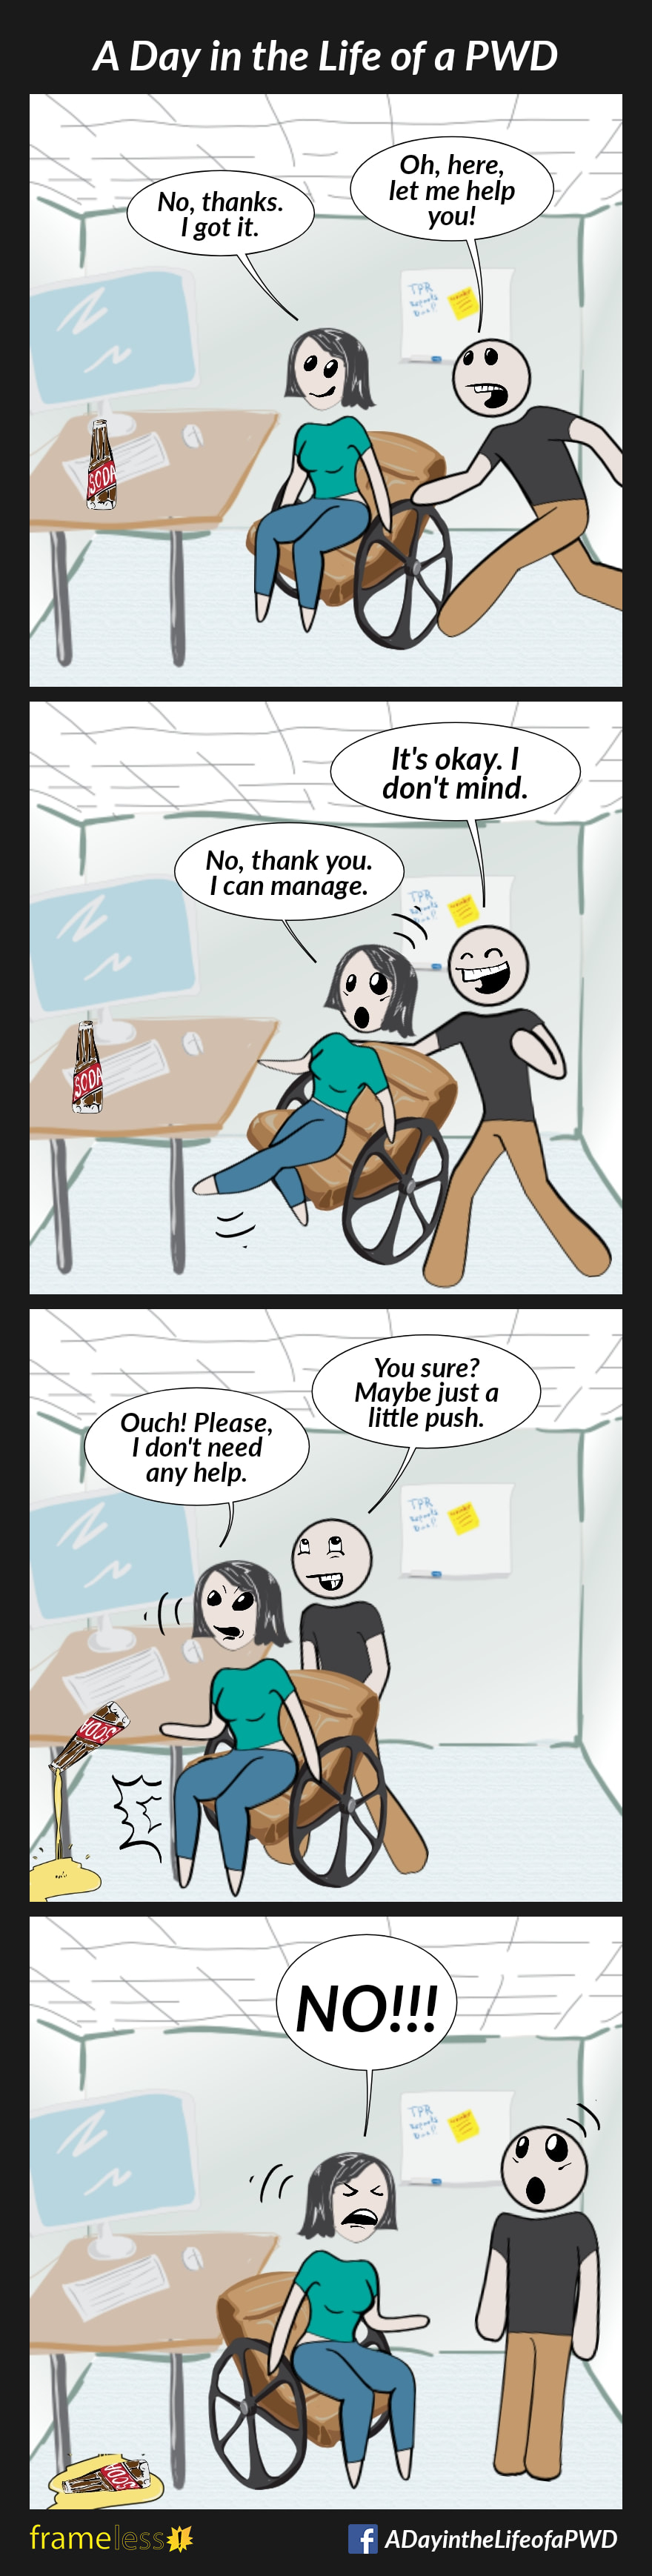 COMIC STRIP 
A Day in the Life of a PWD (Person With a Disability) 

Frame 1:
A woman in a wheelchair is pulling up to a table with a computer on it. A man runs over.
MAN: Oh, here, let me help you!
WOMAN: No, thanks. I got it.

Frame 2:
The man grabs the back of her chair, startling her.
MAN: It's okay. I don't mind.
WOMAN: No, thank you. I can manage.

Frame 3:
MAN:,You sure? Maybe just a little push
The man pushes her chair, banging her knee into the table leg, and knocking over her soda.
WOMAN: Ouch! Please, I don't need any help.

Frame 4:
The woman spins her chair to face the man.
WOMAN (shouting angrily): NO!!!